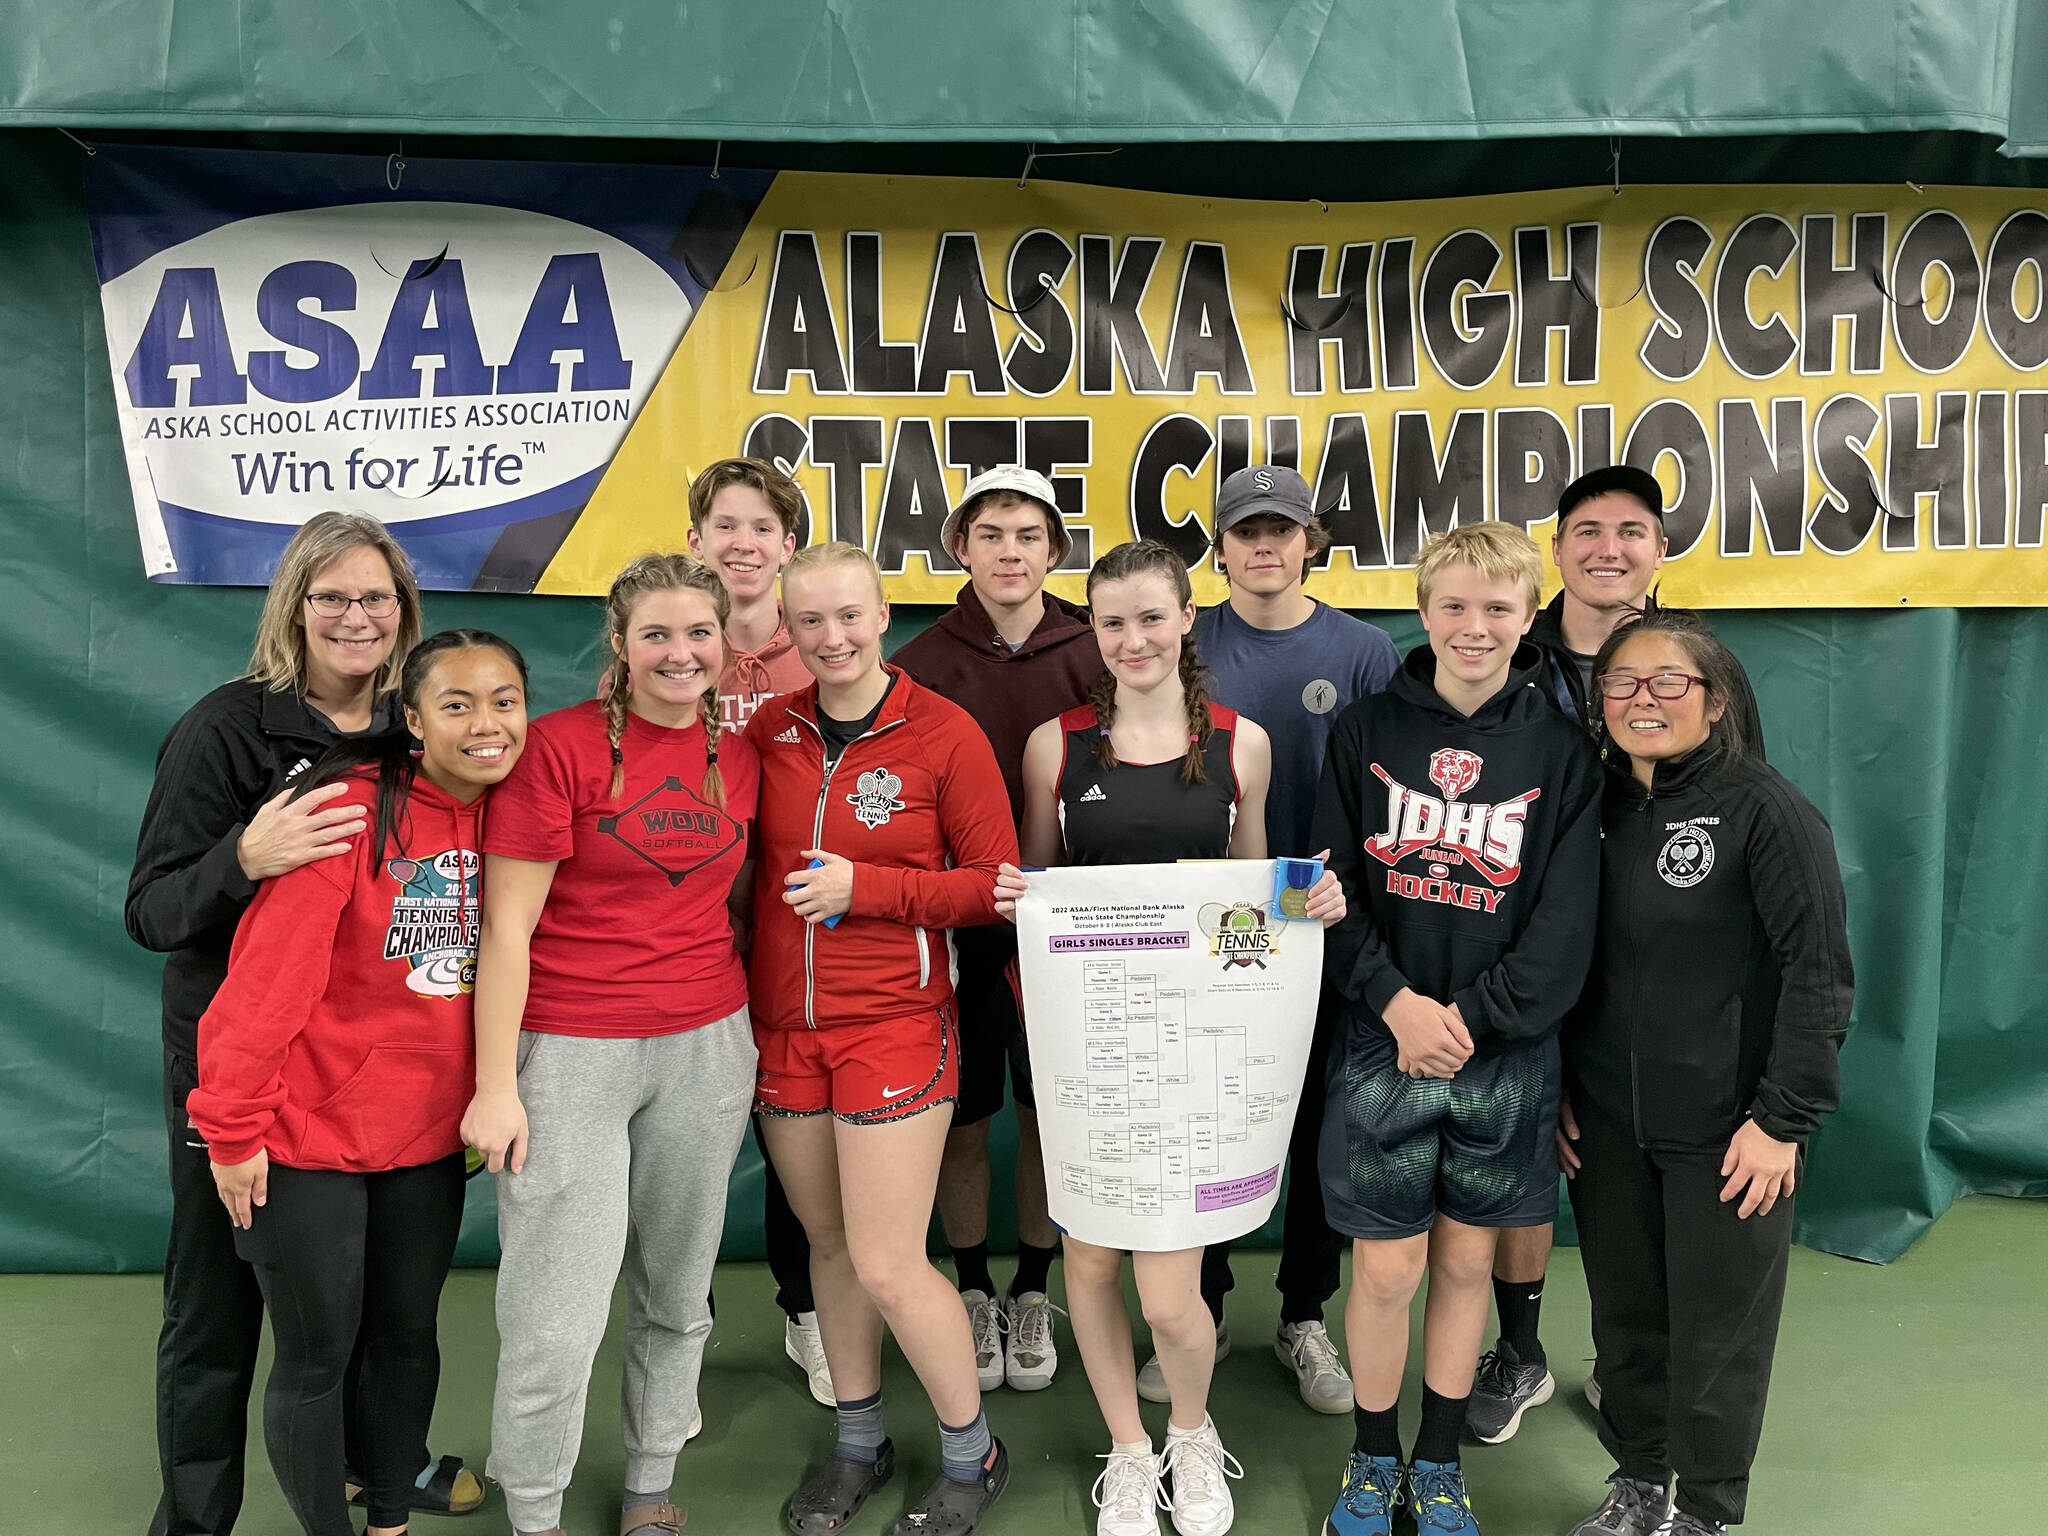 Eight tennis players from the Juneau-Douglas High School tennis team represented Southeast Alaska at this year’s state championship and earned a tie for third place as a team with senior Katie Pikul earning the bulk of the team’s points after winning the girls’ singles championship, a feat which hasn’t been done by a Juneau player in over a decade. (Courtesy / Mona Mametsuka)